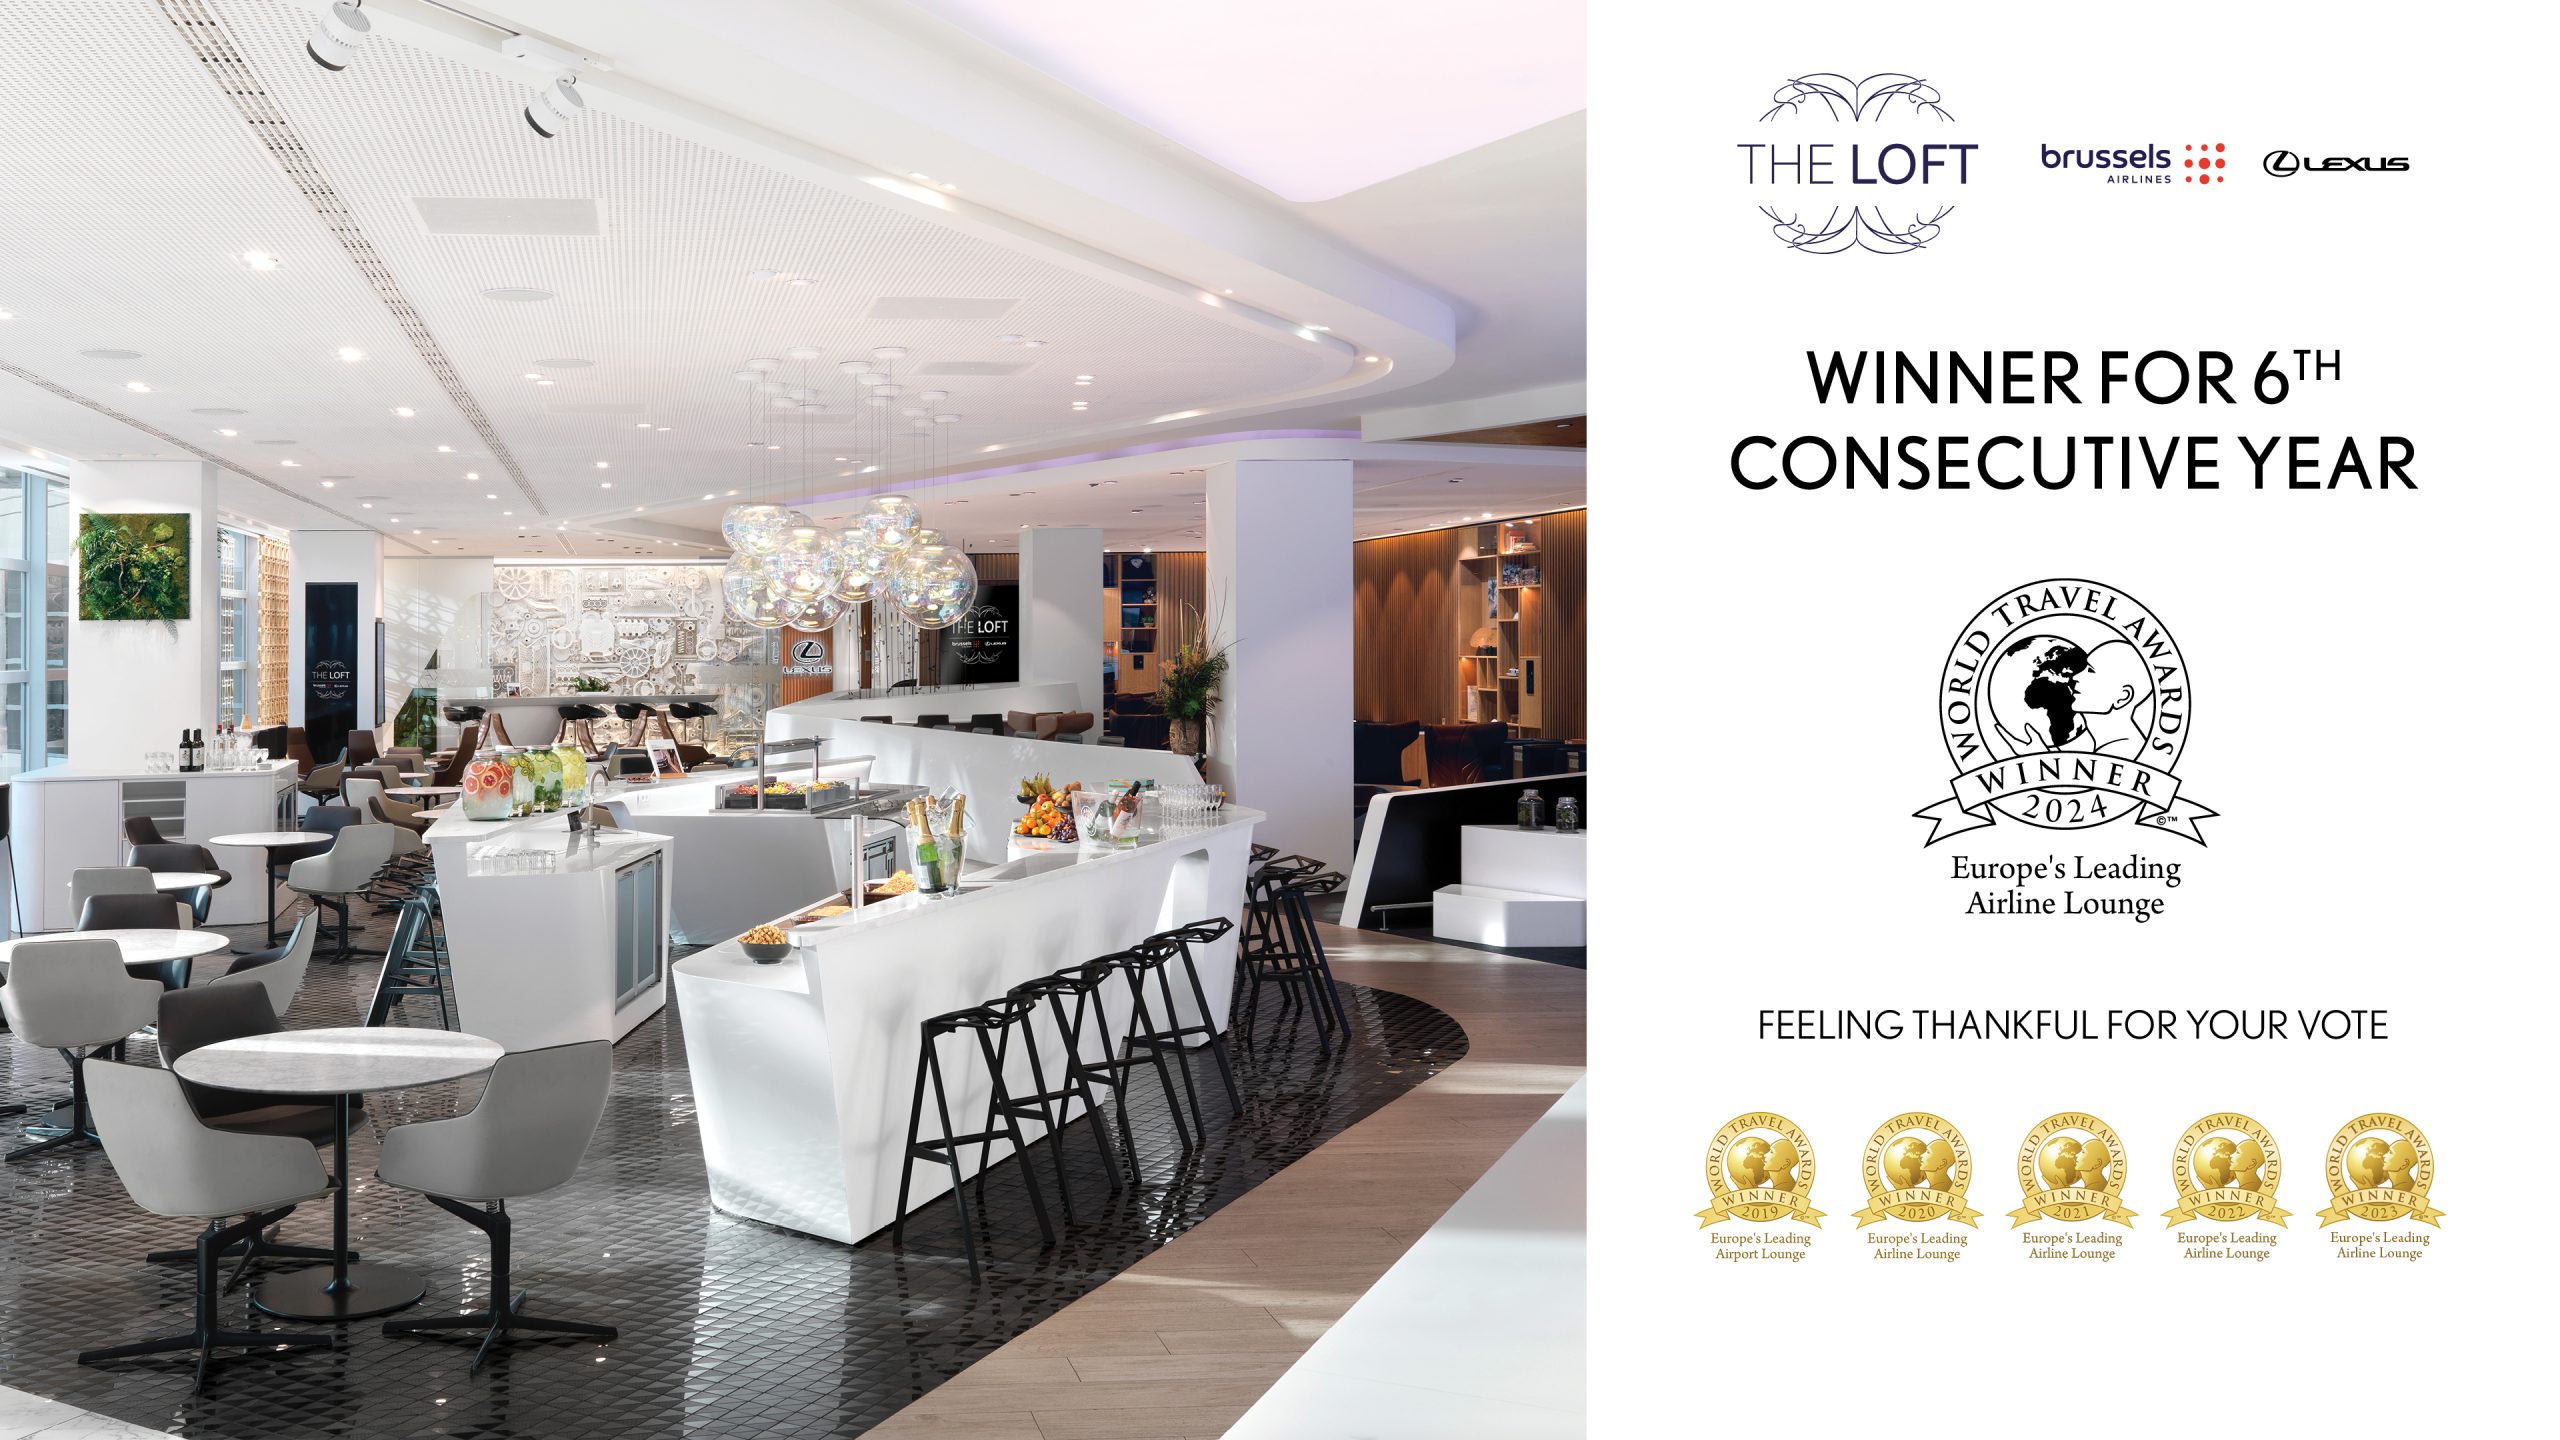 The Loft by Lexus and Brussels Airport named Europe’s Leading Airline Lounge at World Travel Awards, for sixth year running.